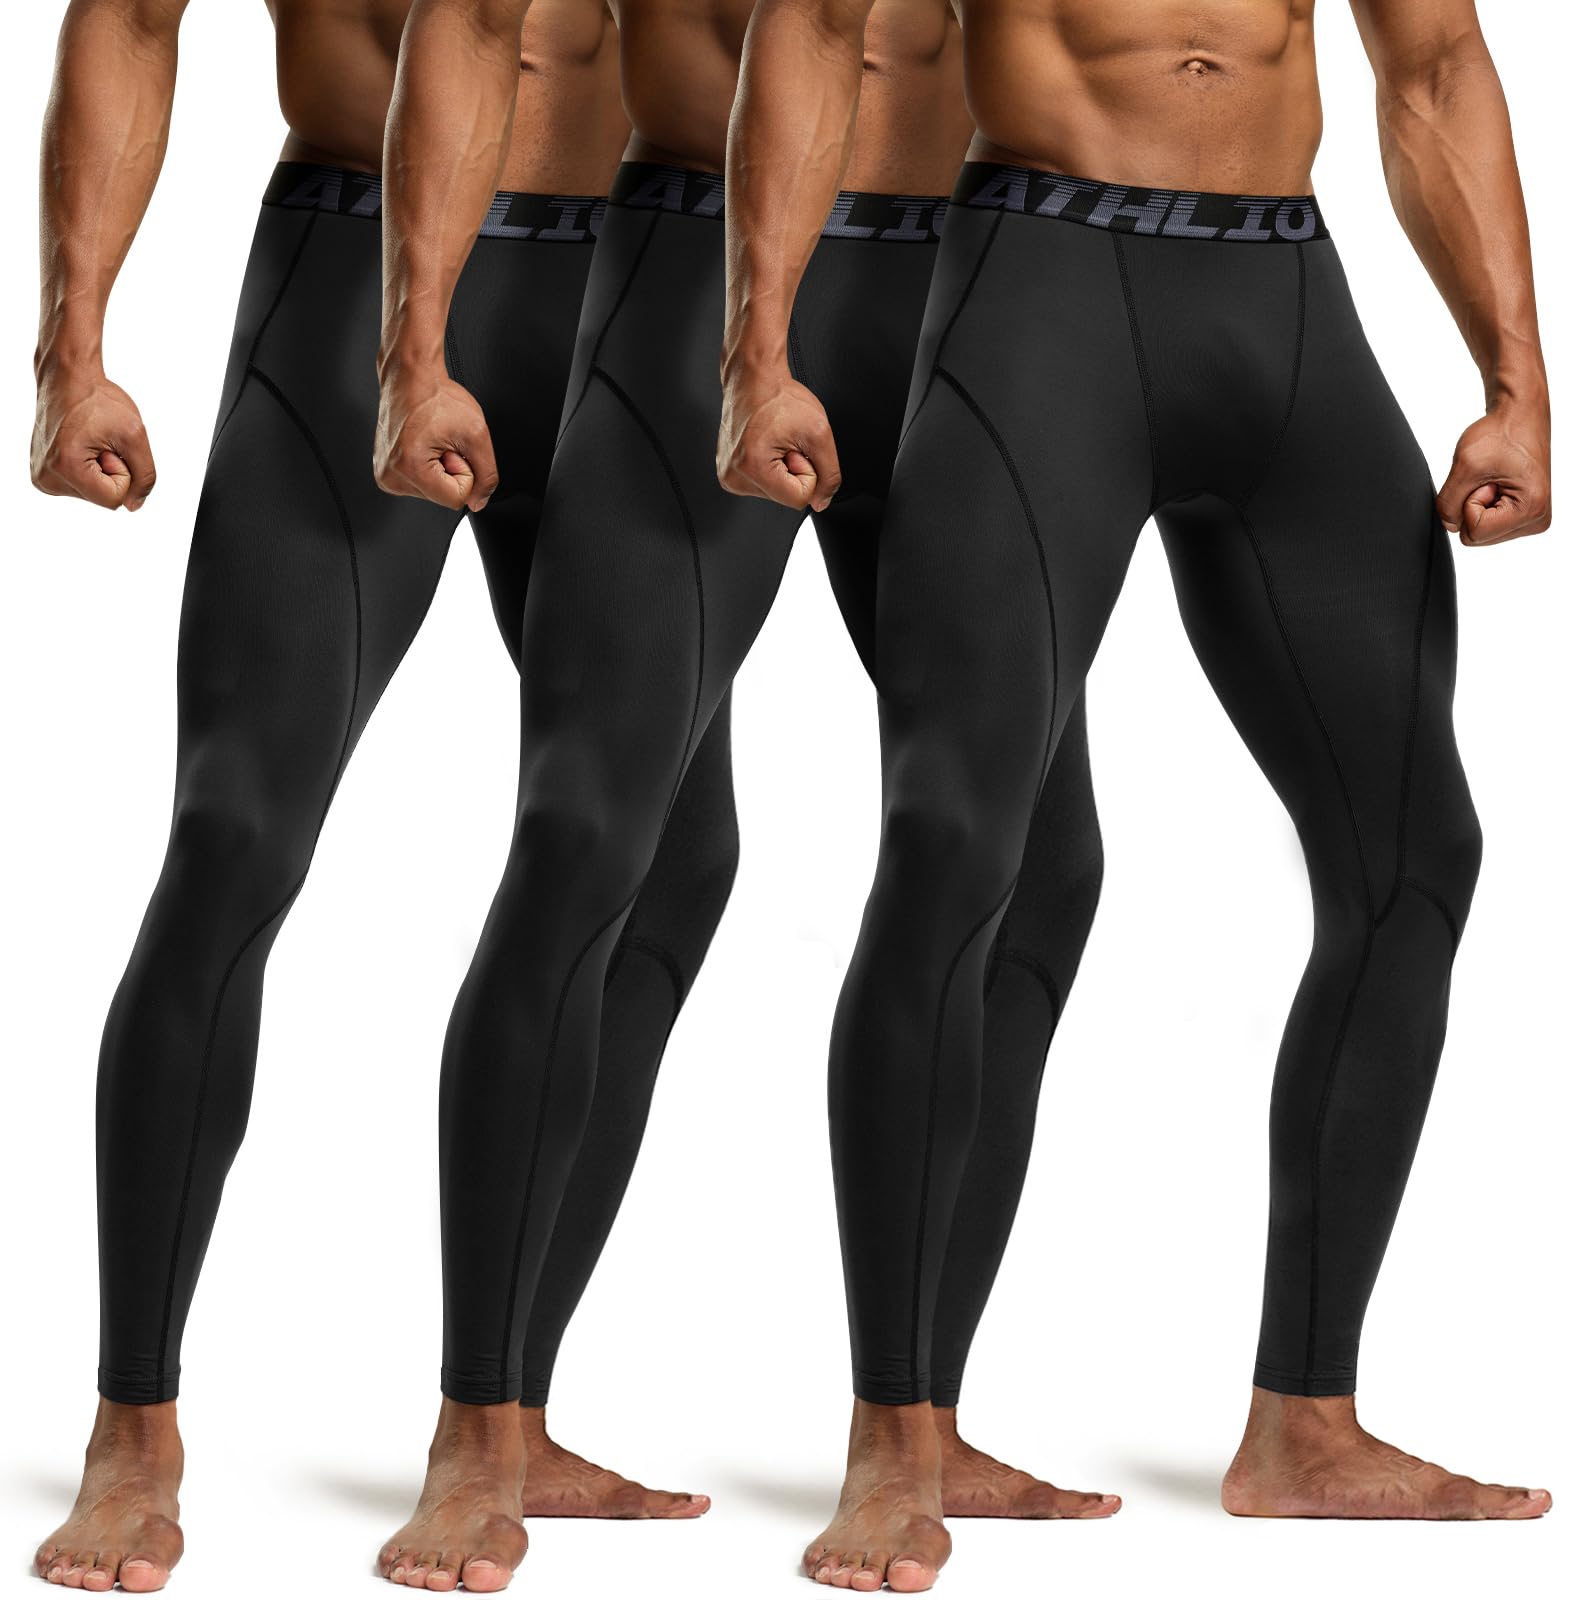 ATHLIO Men's Thermal Compression Pants, Athletic Running Tights & Sports Leggings, Wintergear Base Layer Bottoms, 3pack Thermal Pants Black/Black/Black, Large